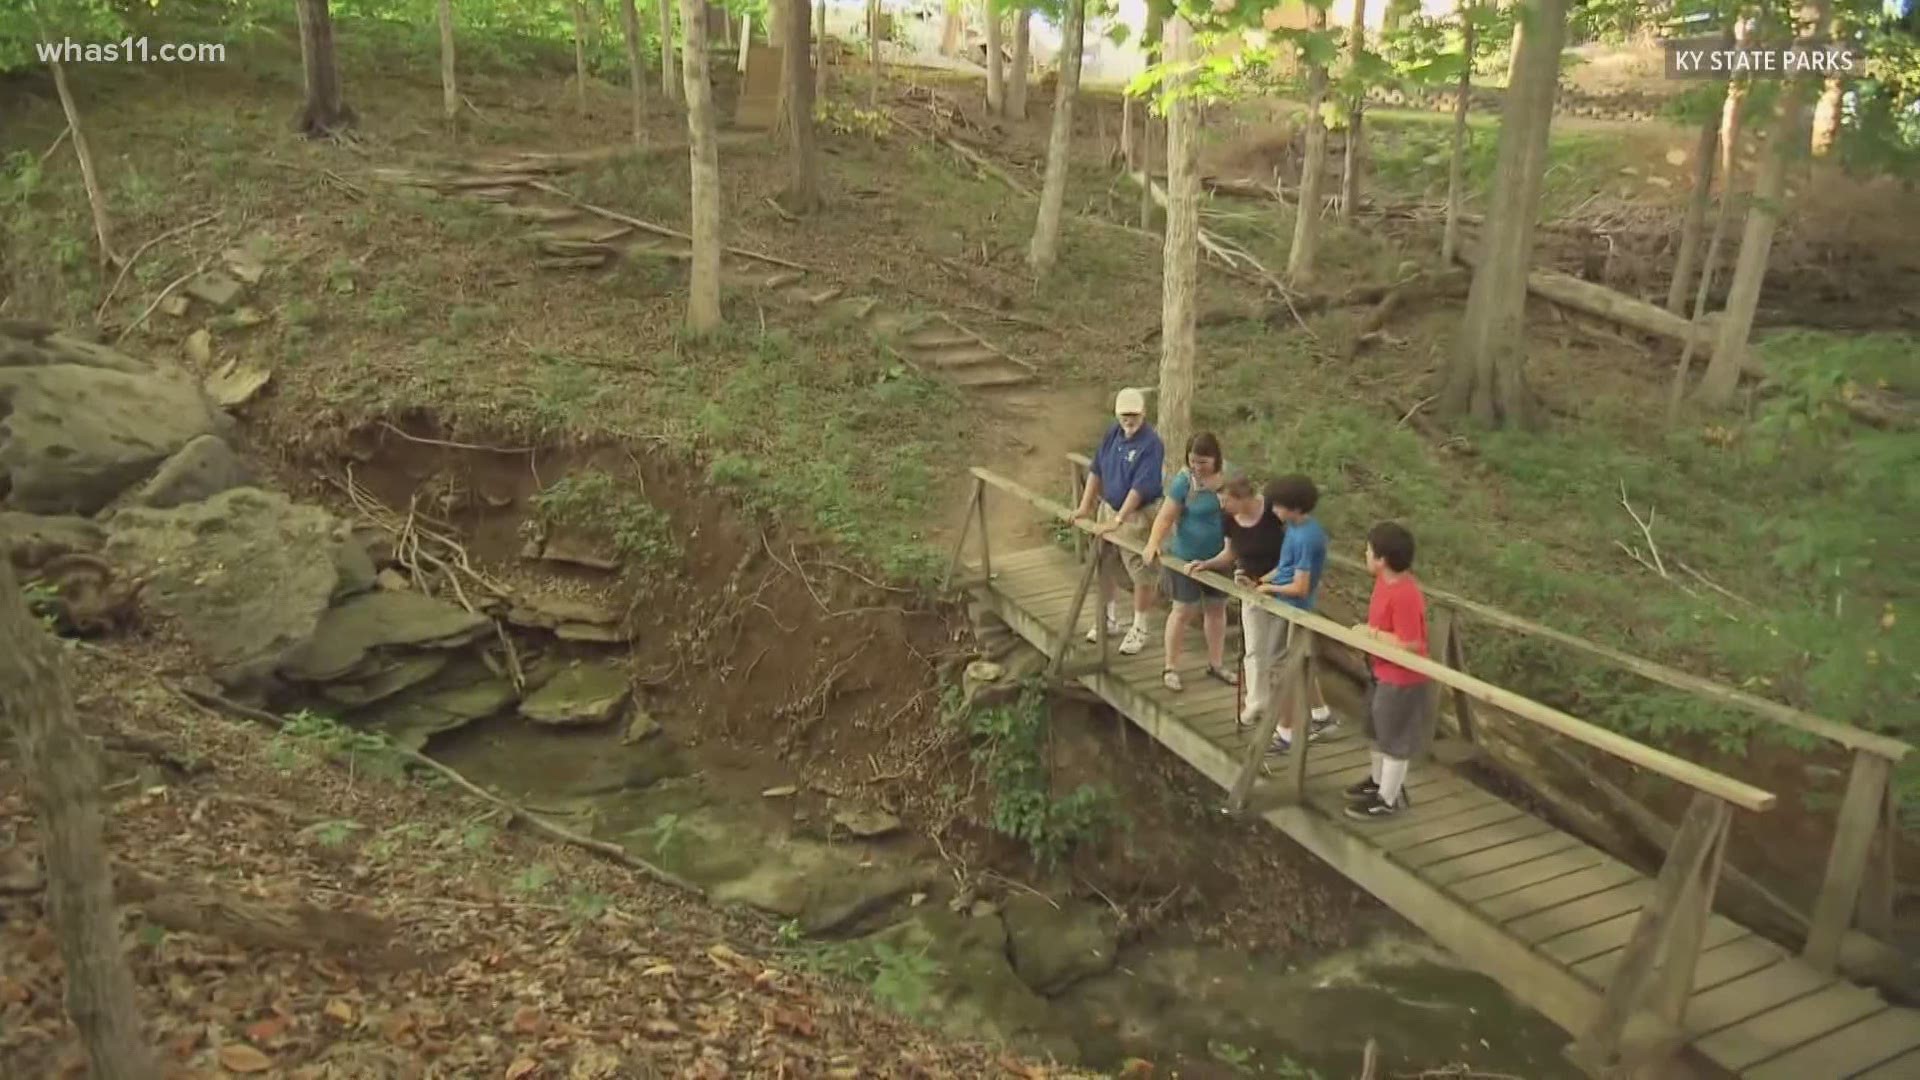 Wake Up's Rob Harris is breaking down the cost to visit a state park in Kentucky or Indiana.